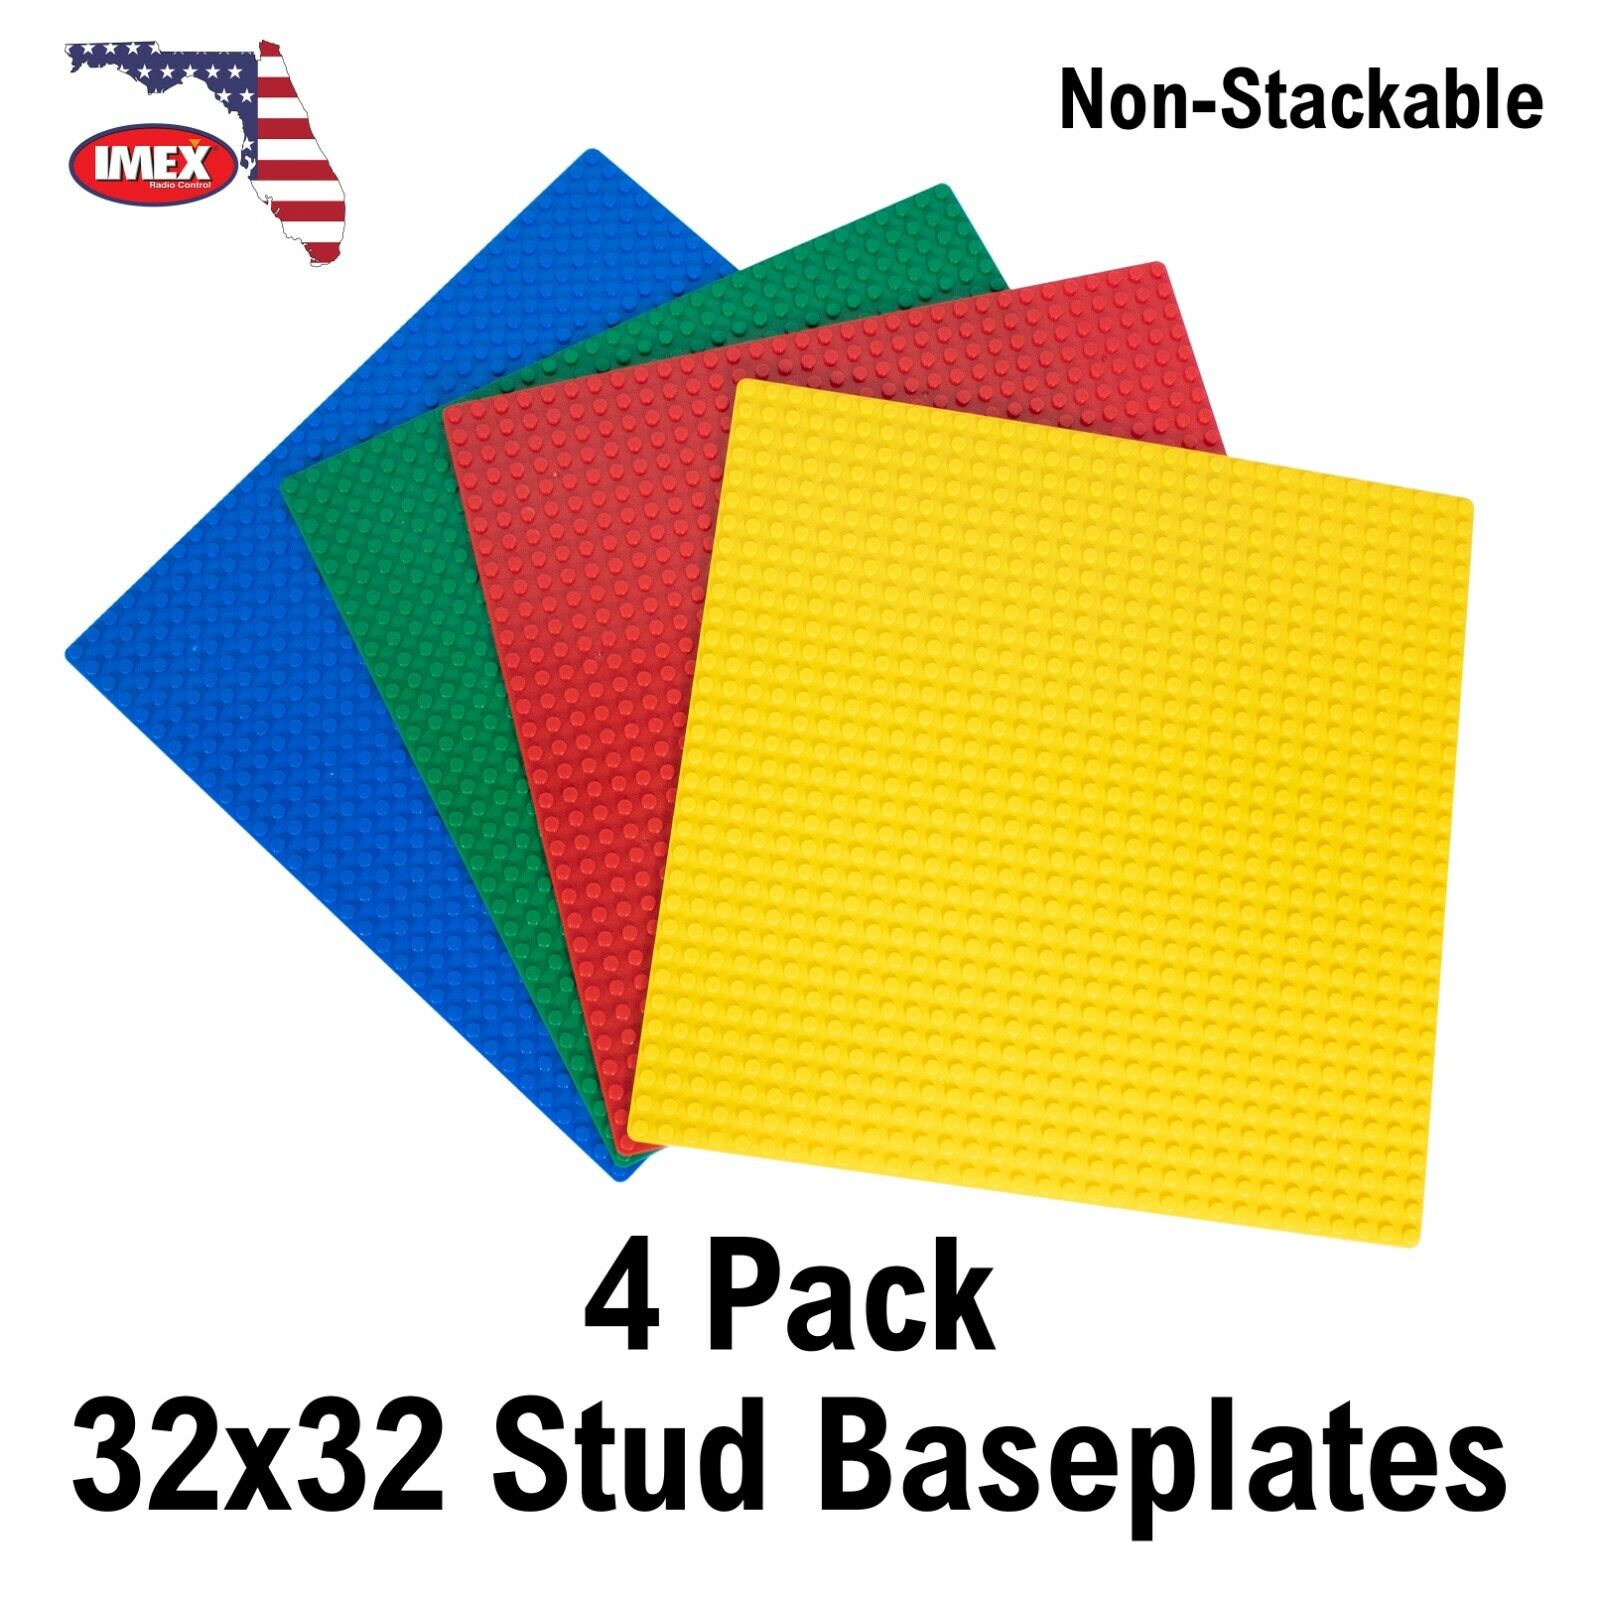 4PC MAKE A TABLE 32X32 FLAT BASEPLATE (RED, YELLOW, BLUE, GREEN)